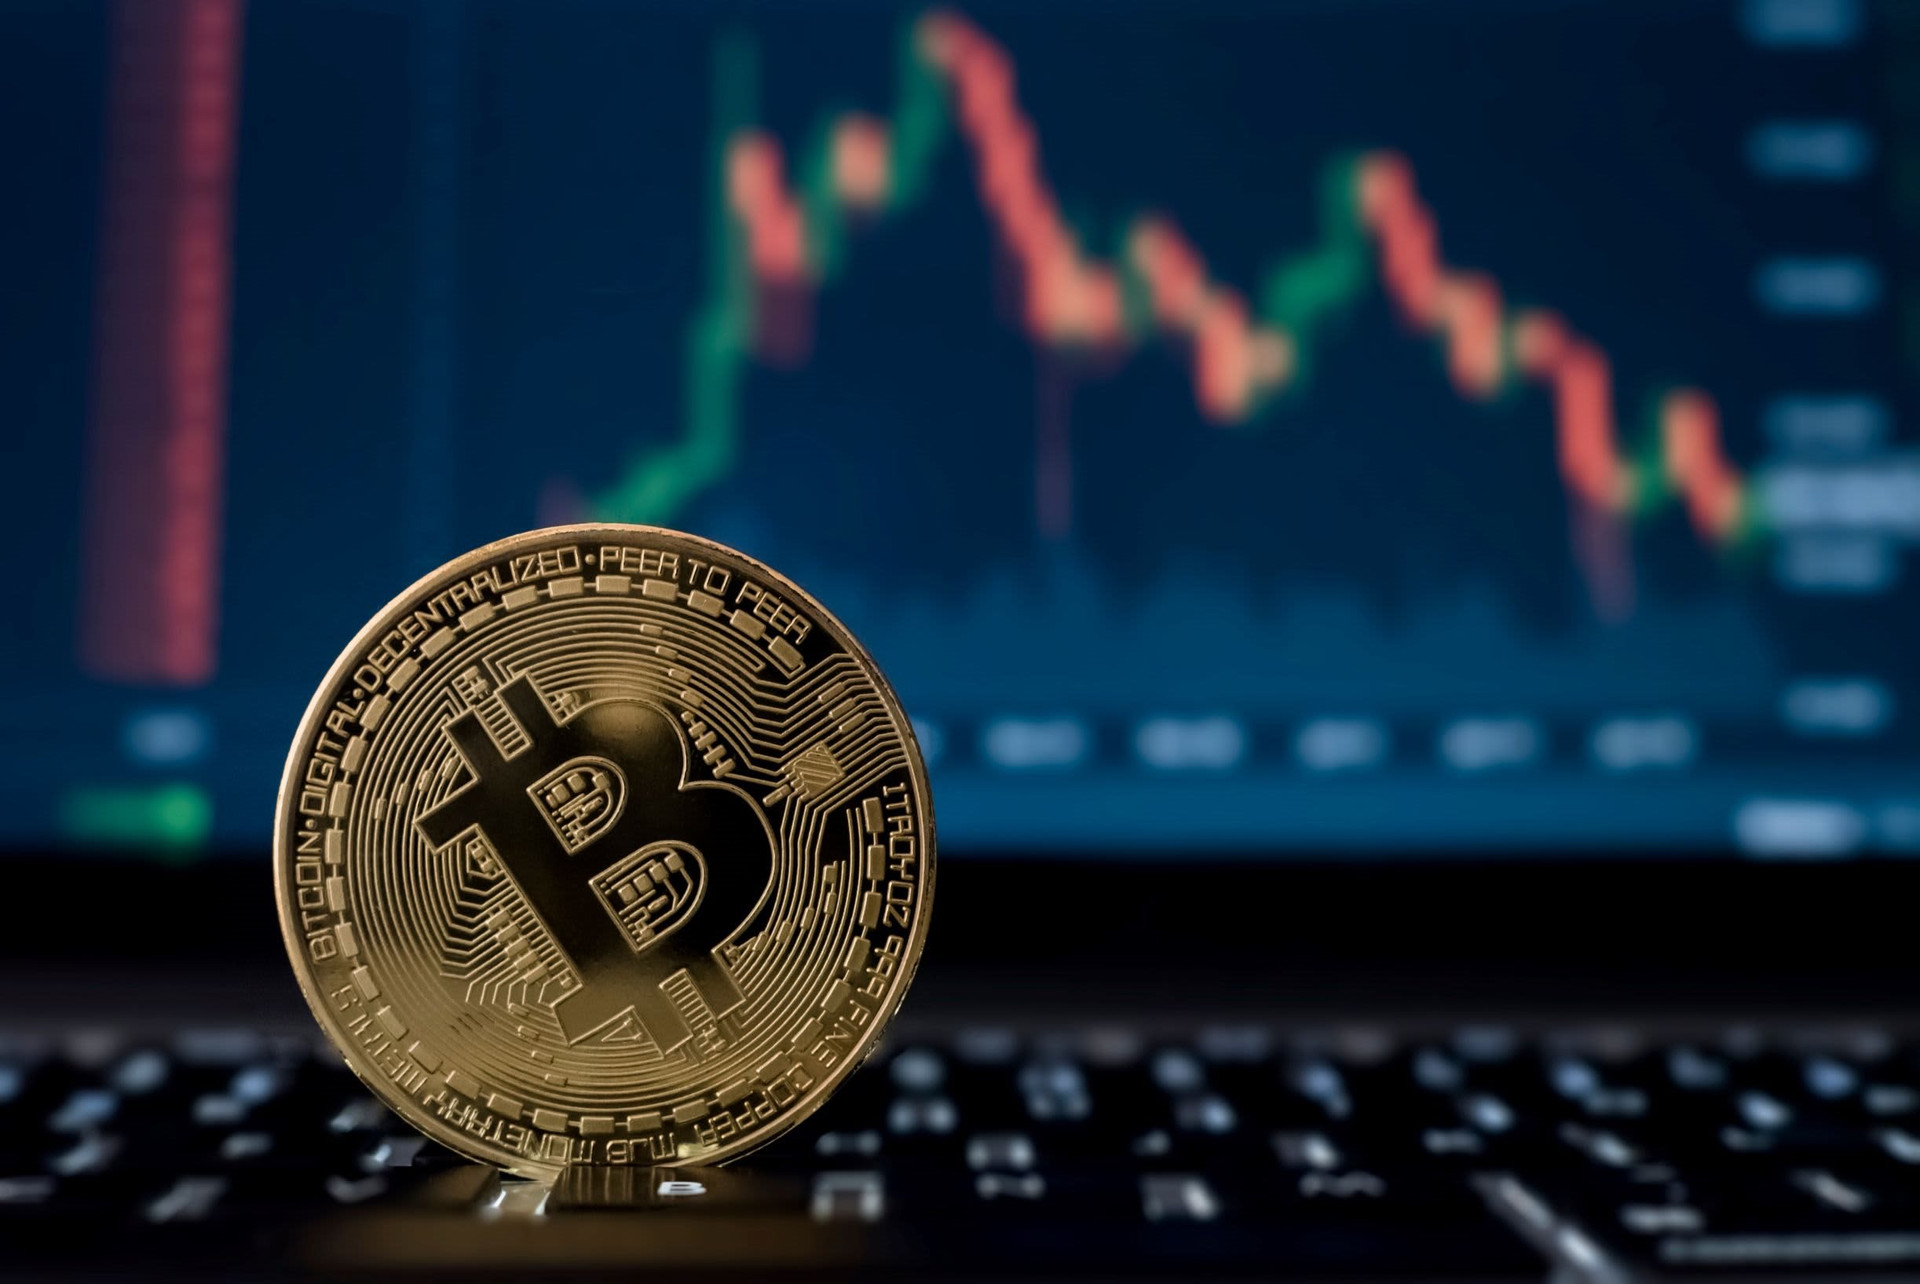 106893887-1623167512779-bitcoin-digital-crypto-currency-with-stock-market-candlesticks-on-computer-screen-rltheis_t20_w7xvwy.jpg